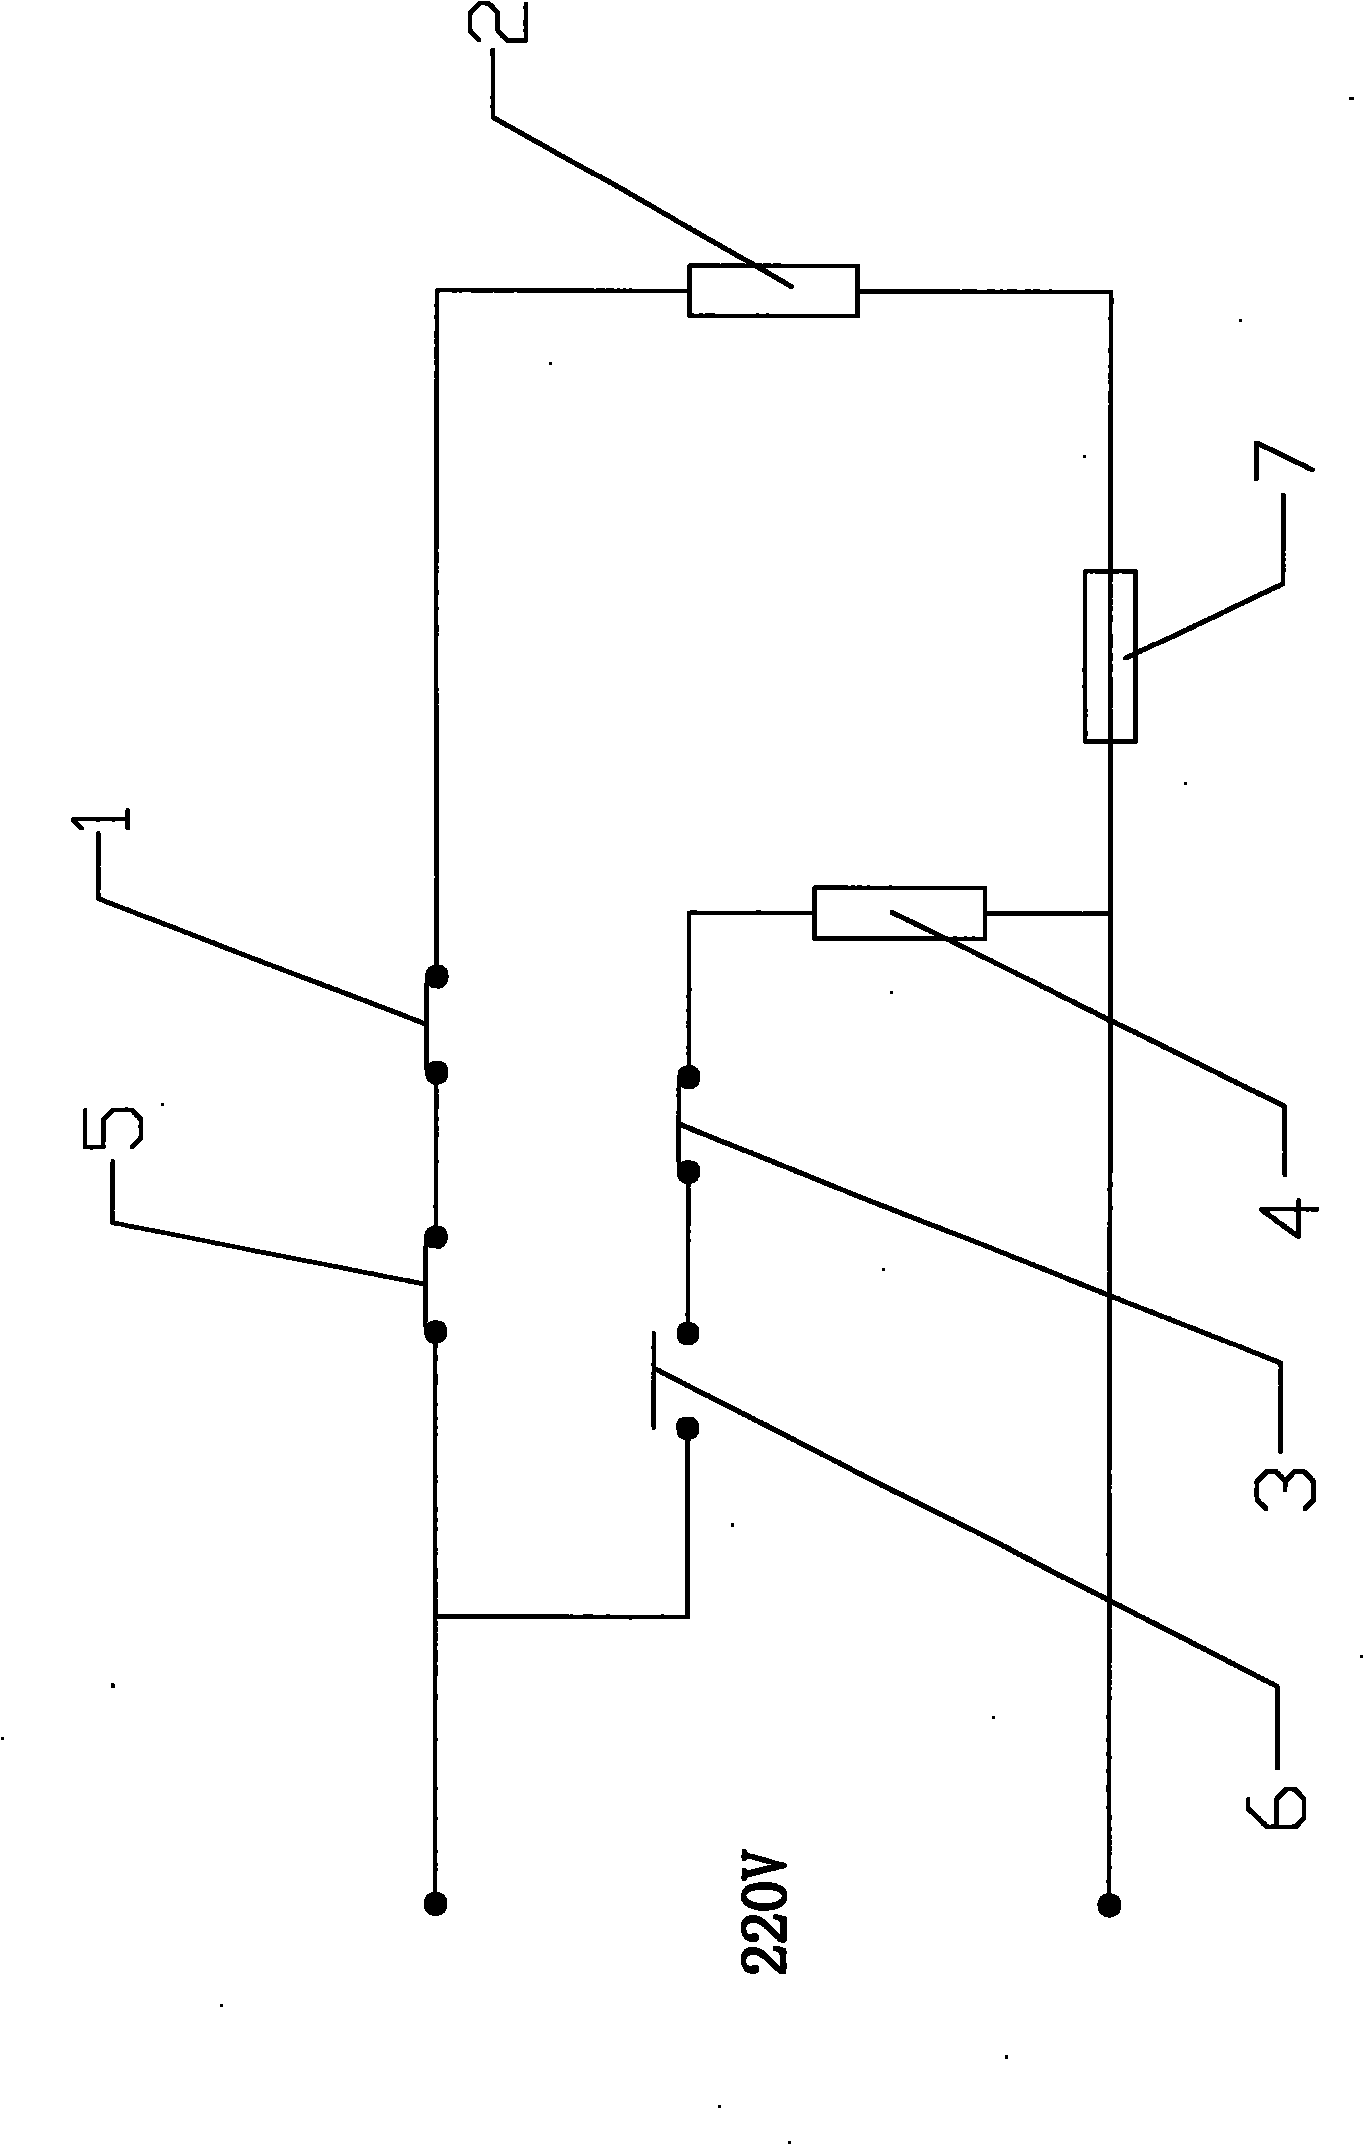 Thermal protection control circuit of electric iron